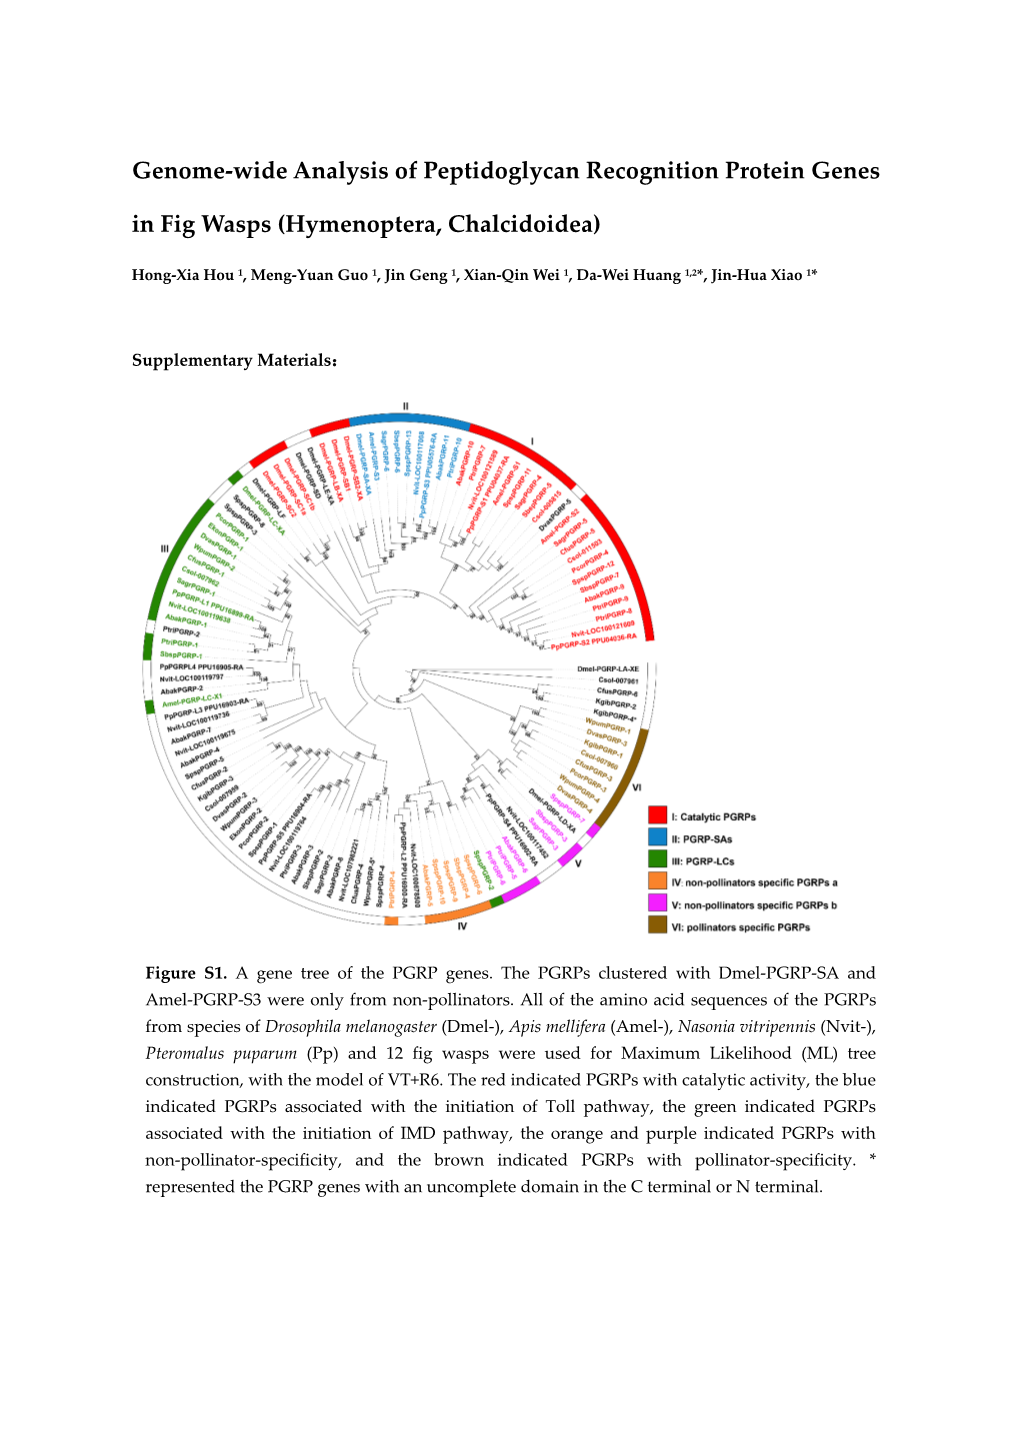 Genome-Wide Analysis of Peptidoglycan Recognition Protein Genes in Fig Wasps (Hymenoptera, Chalcidoidea)